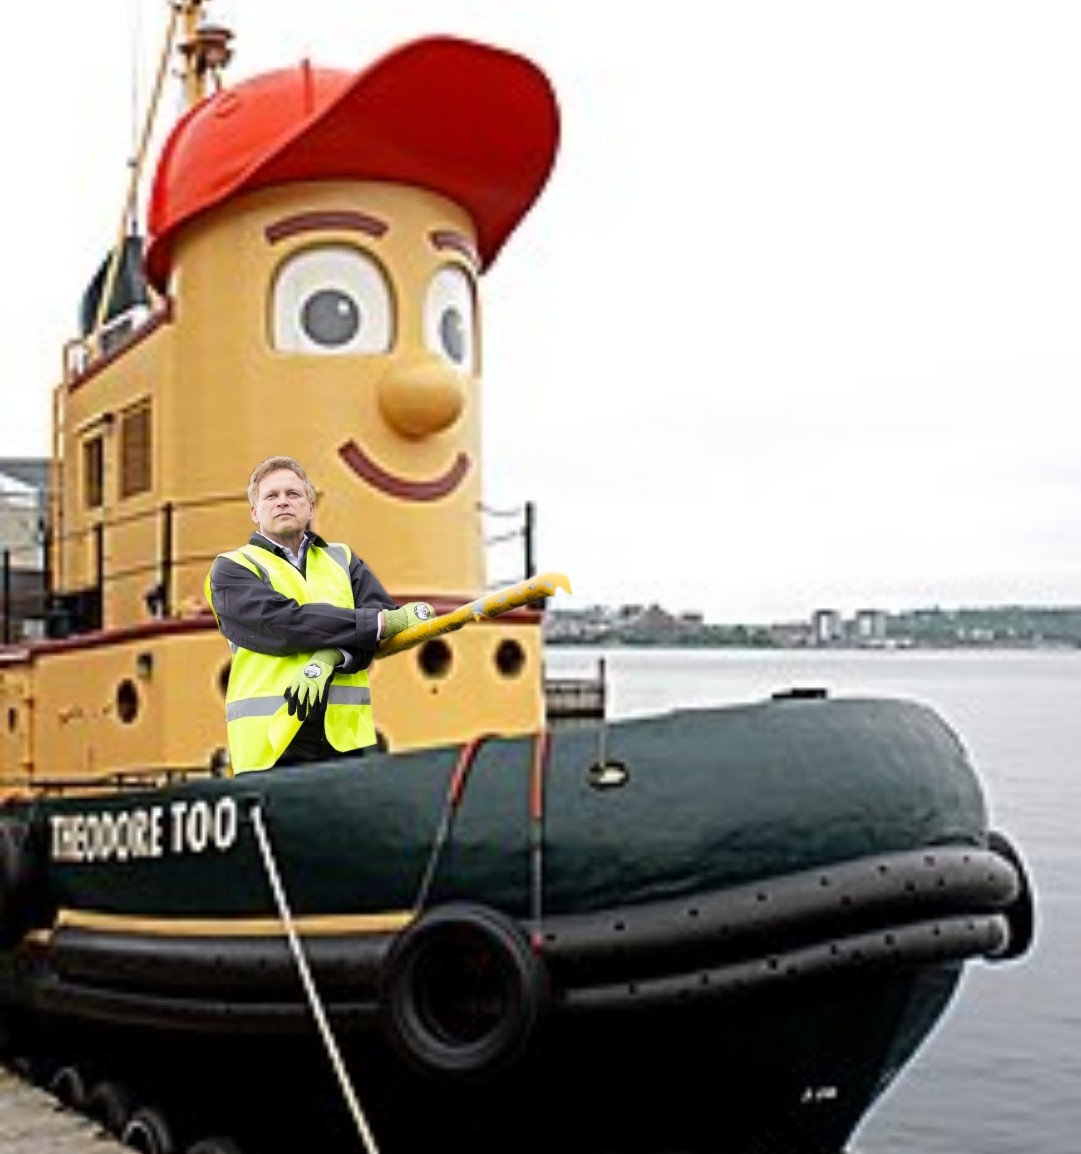 🚨 Today marks the start of a new golden age of British shipbuilding, says Defence Secretary @grantshapps. 

Pictured, is Shapps looking like a proud parent standing on his tugboat. 

#NeverTrustATory #ToryLies 
#ToryWipeout #ToryGaslighting 
#GeneralElectionNow #ToryChaos